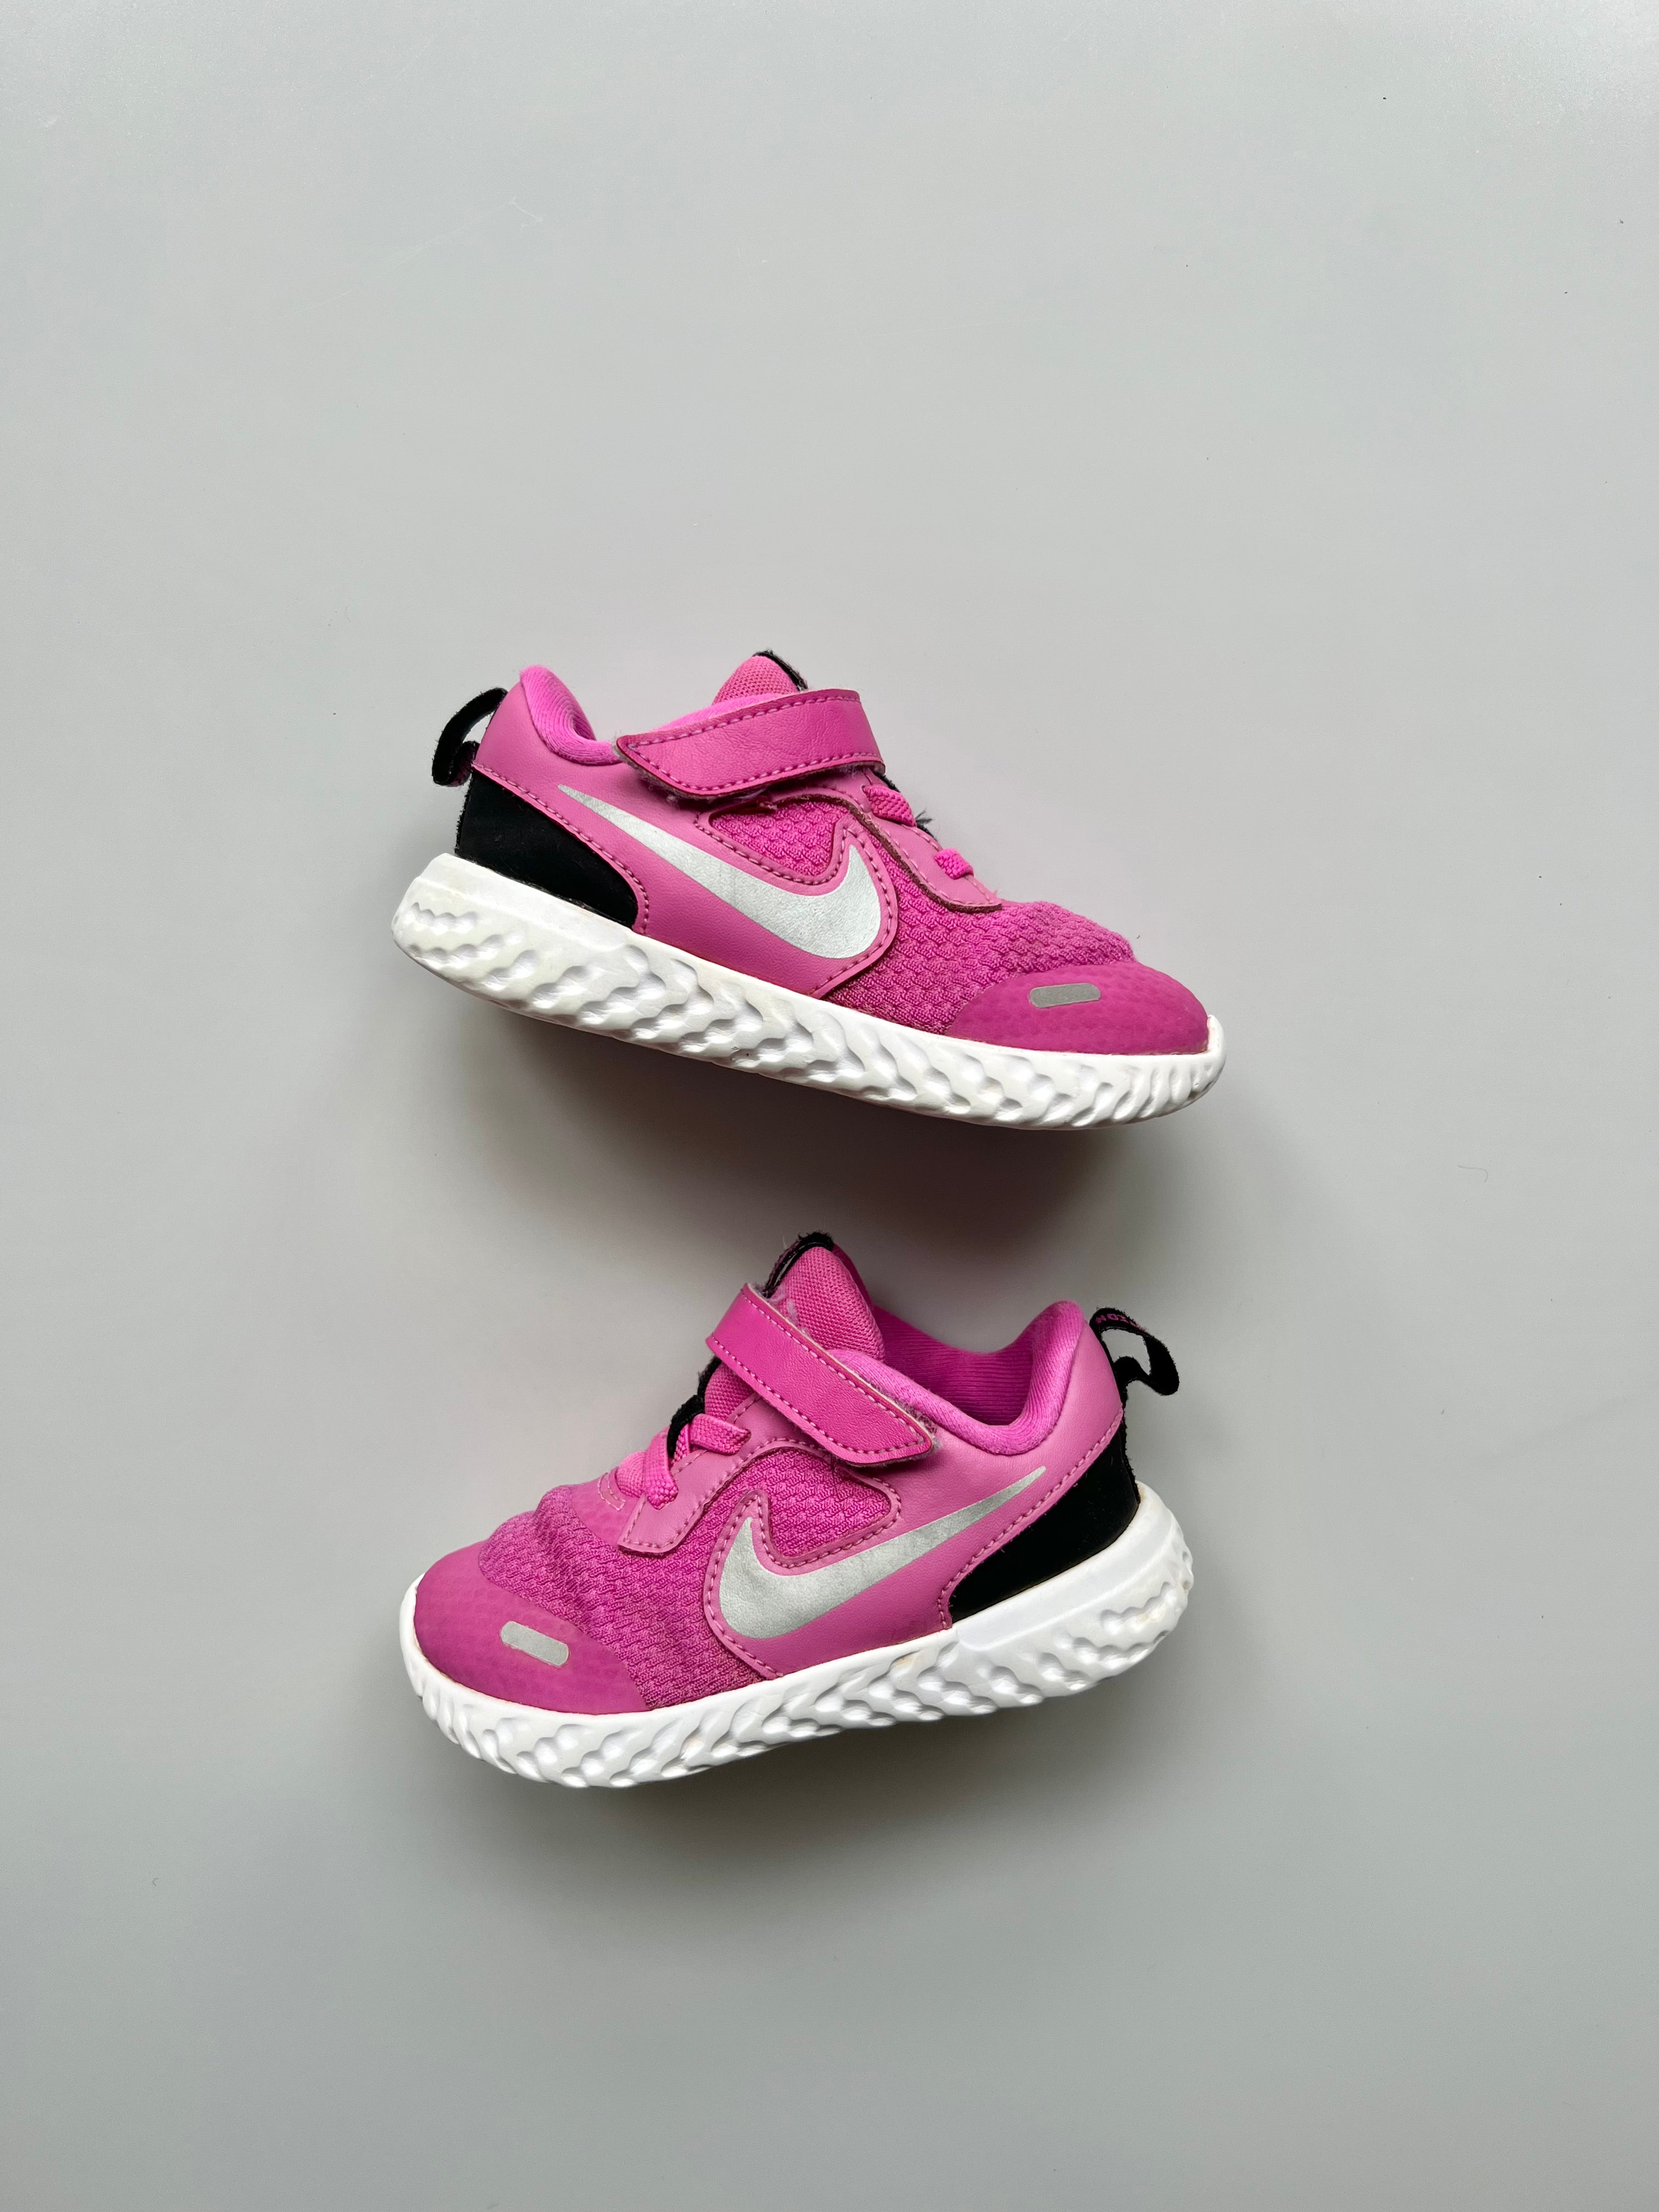 Nike Revolution Trainers Size 7.5